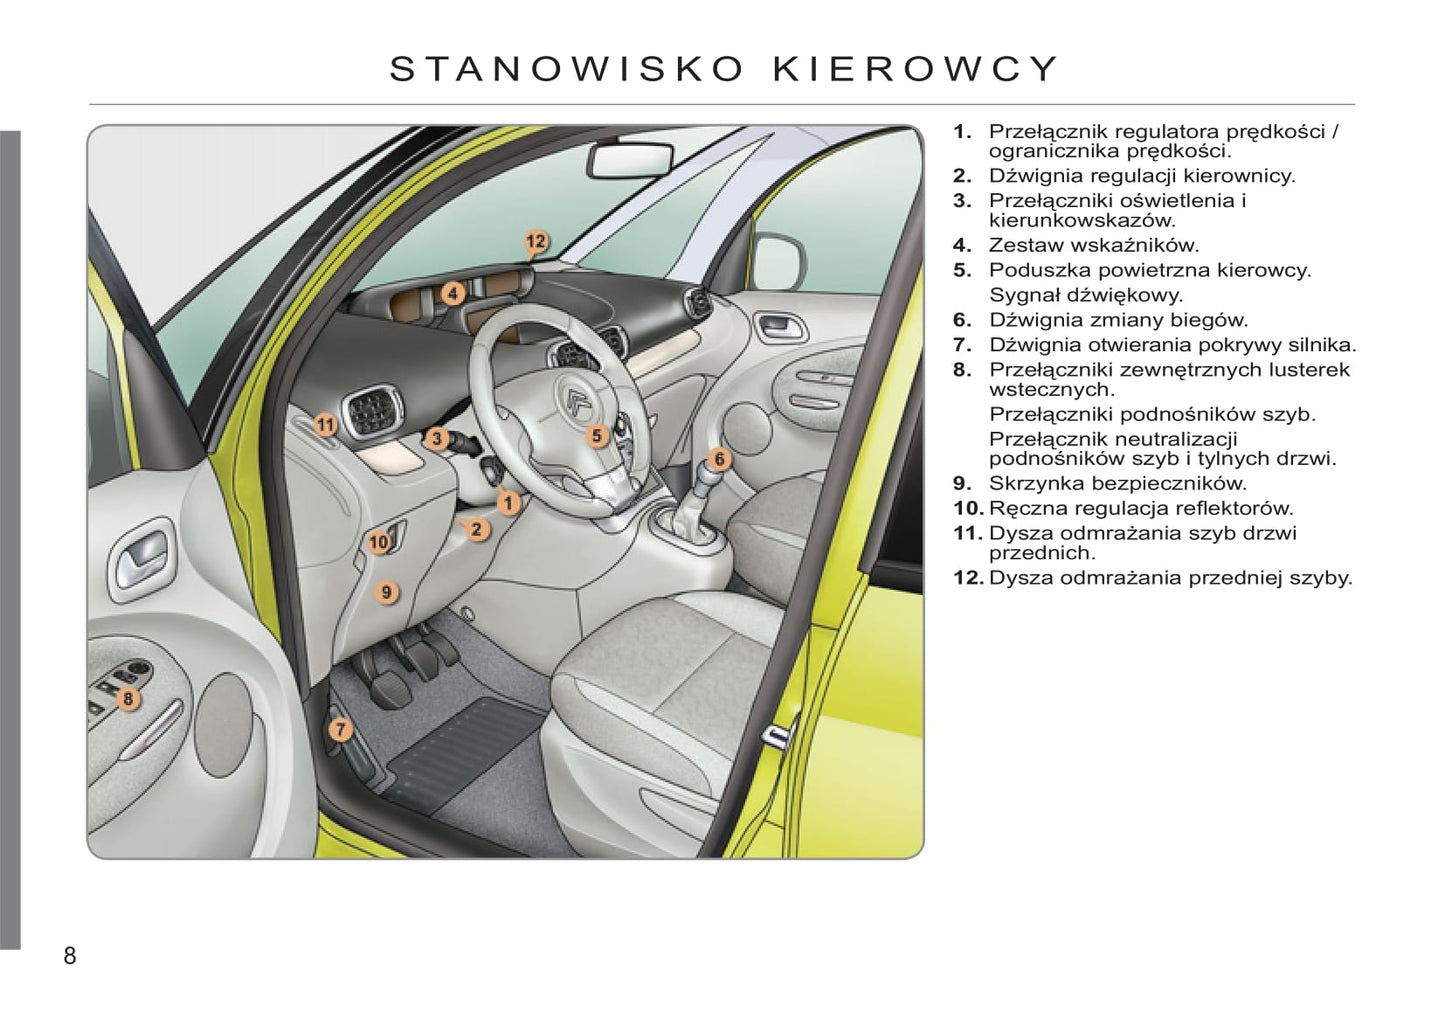 2011-2012 Citroën C3 Picasso Owner's Manual | Polish